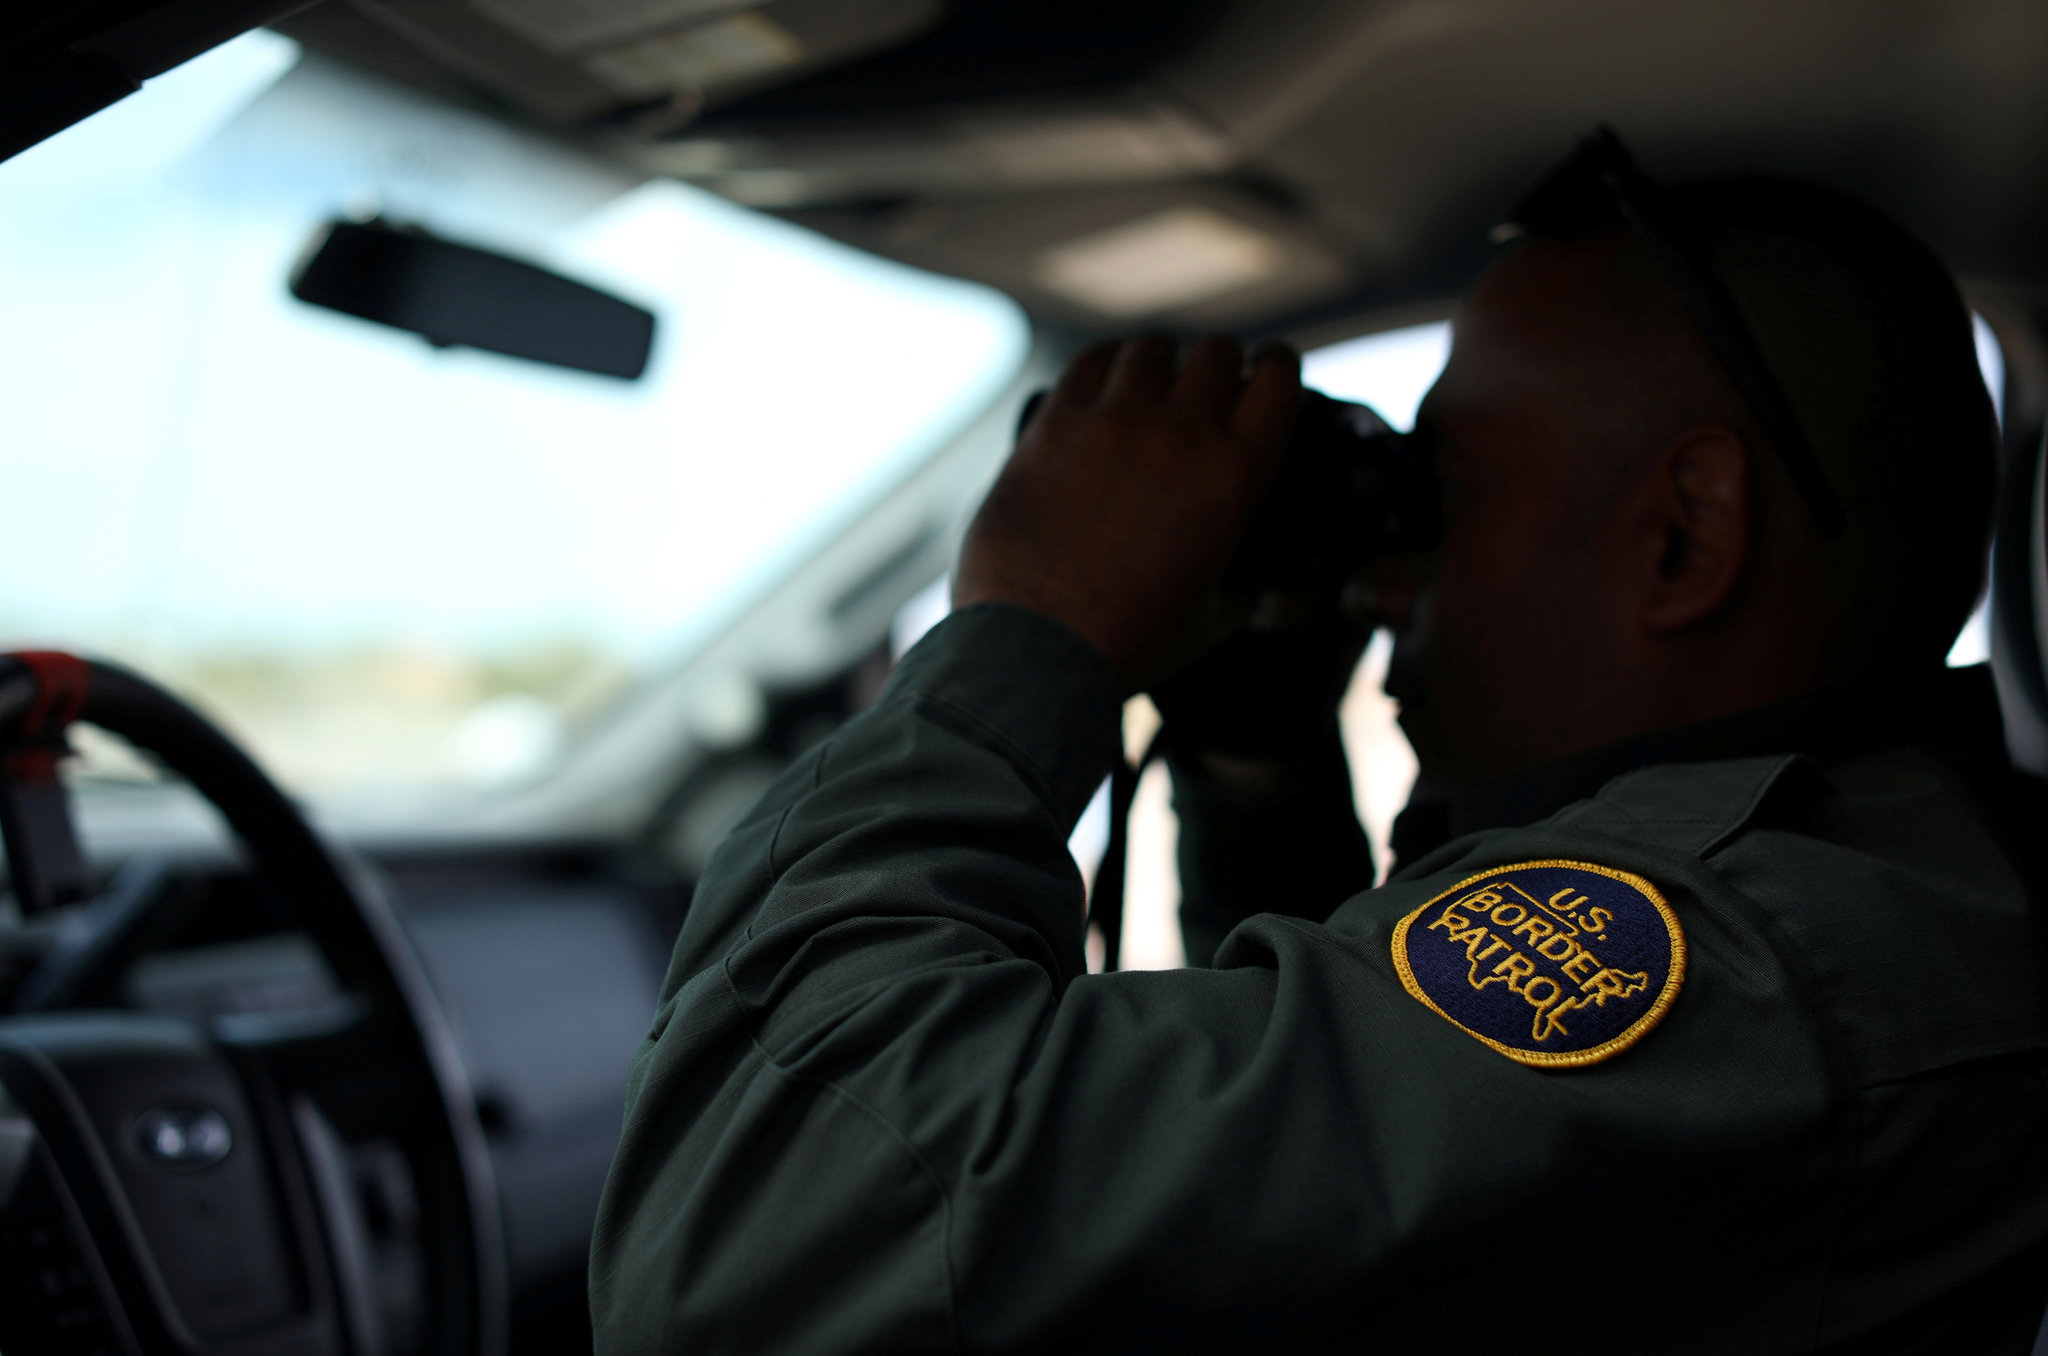 Border Patrol agents assaulted, threatened in three separate incidents